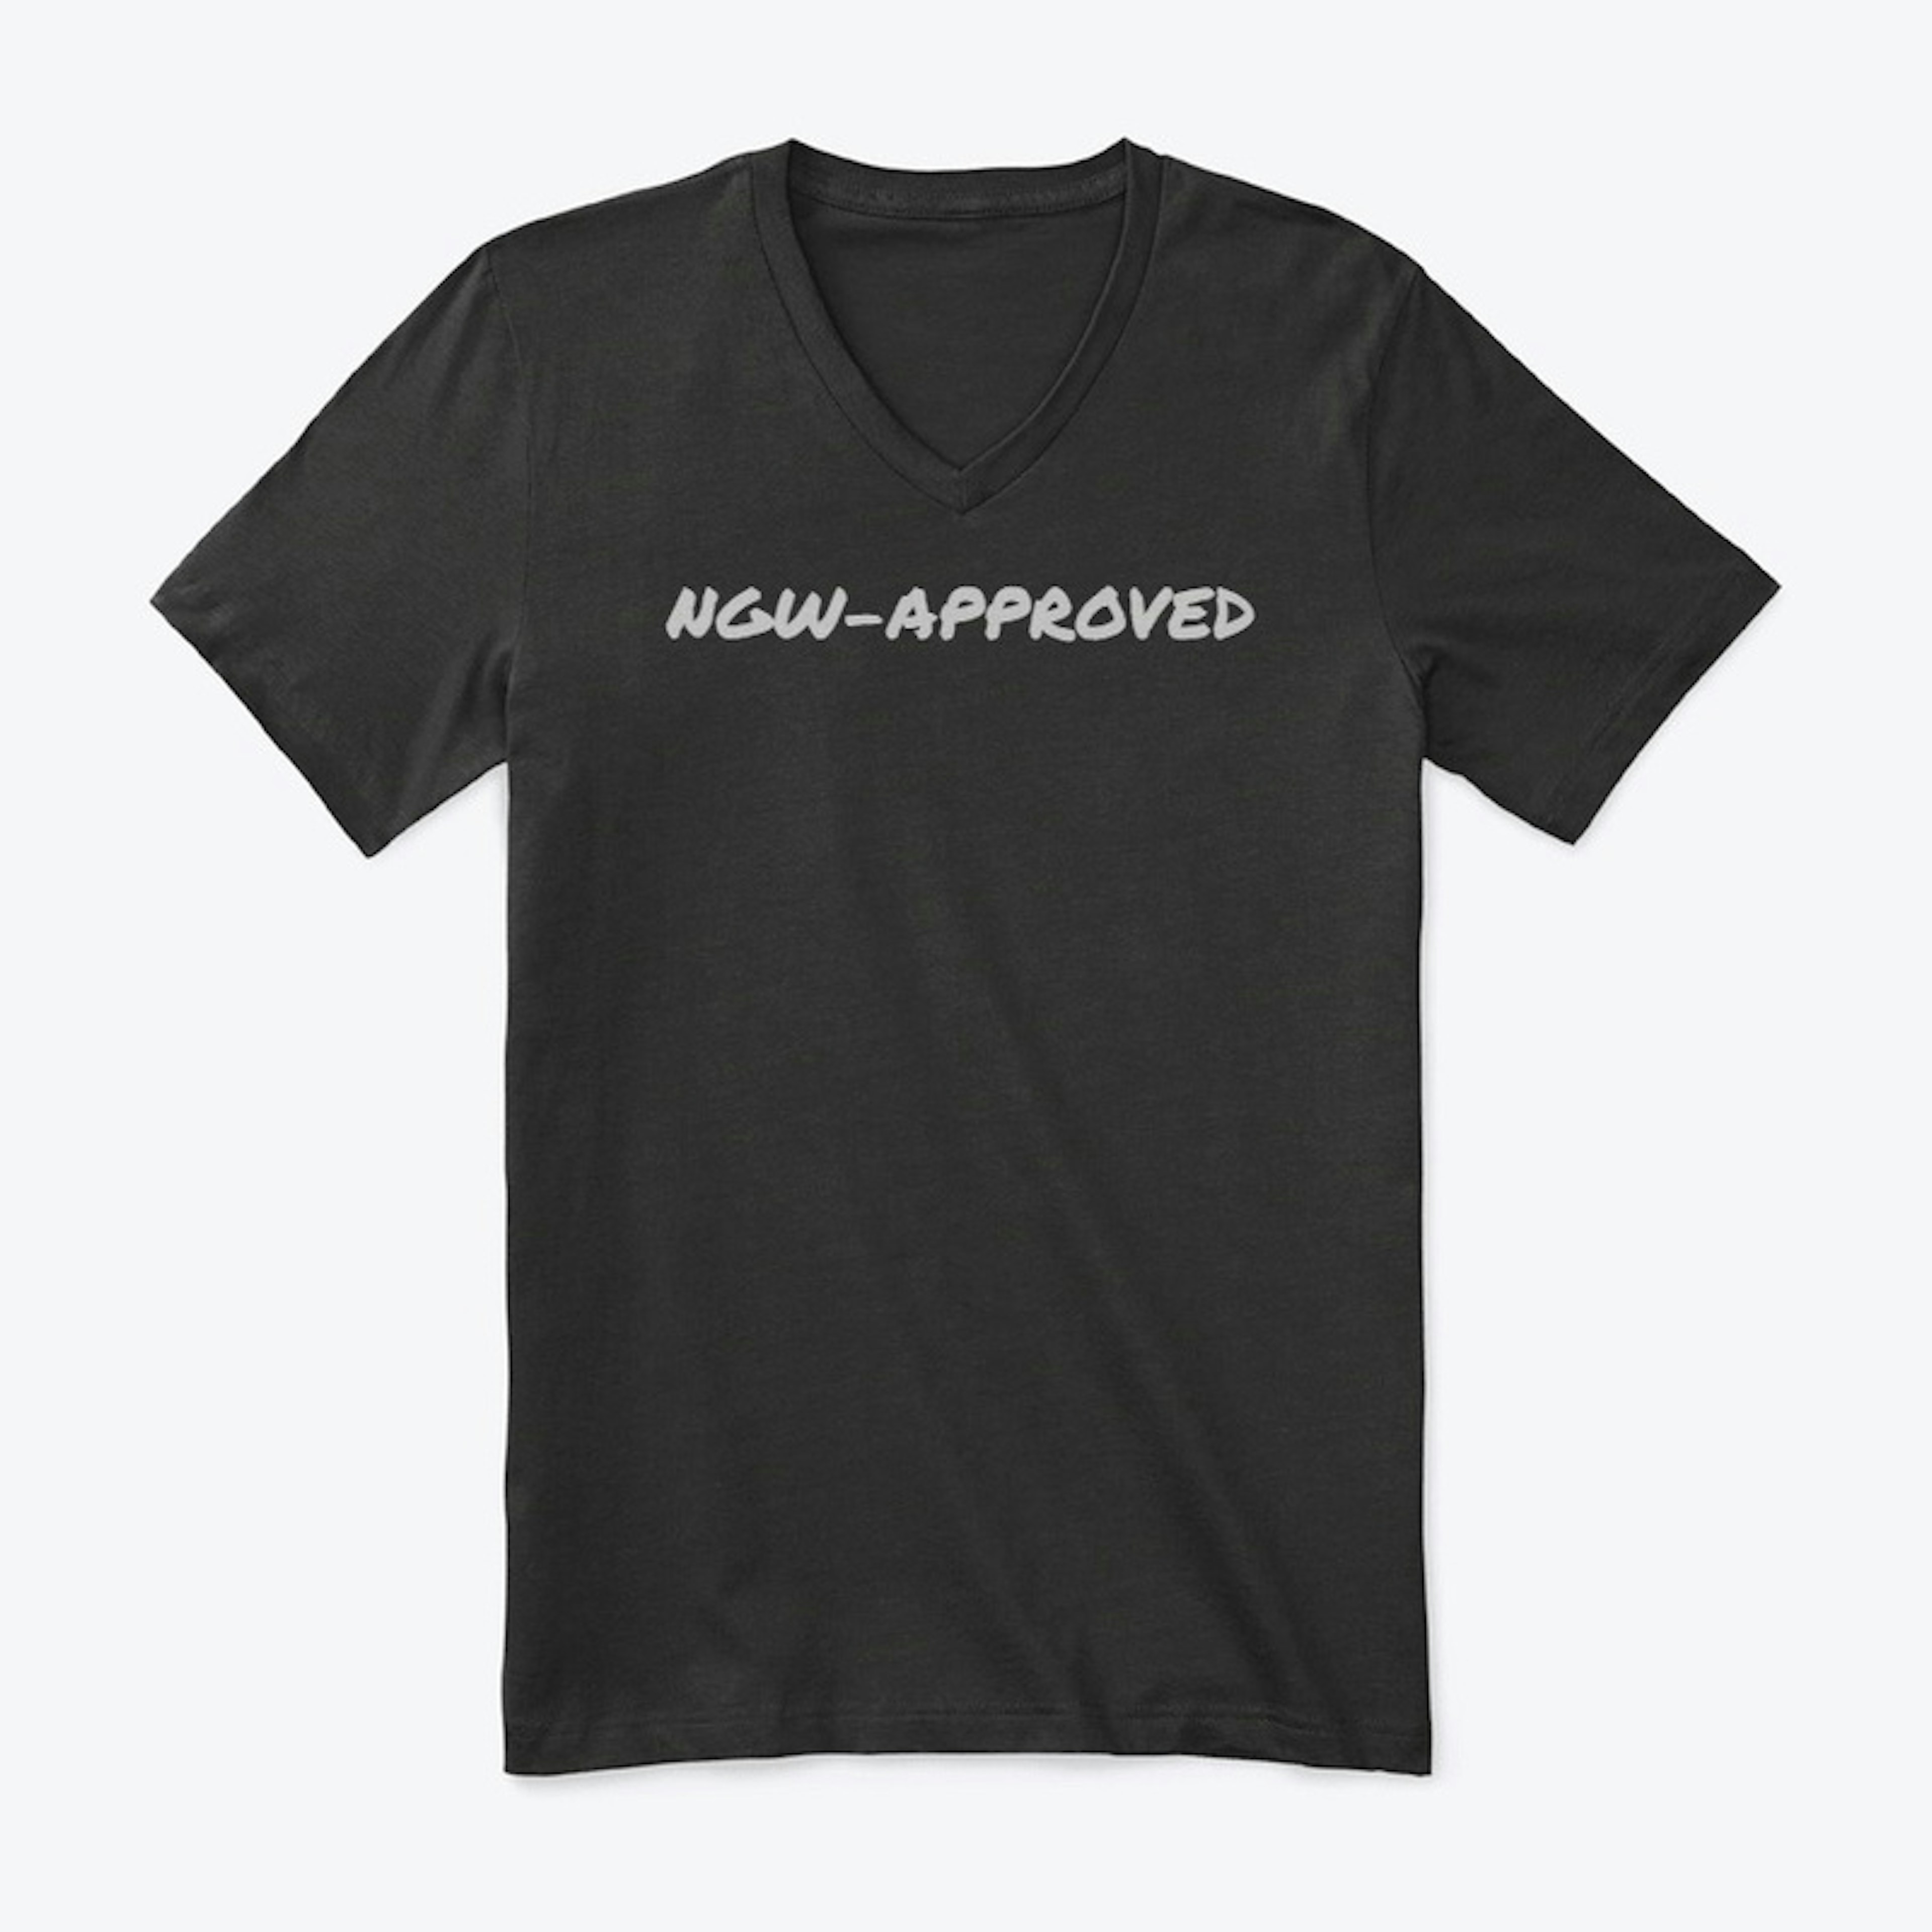 NGW-APPROVED TEE (BLACK)